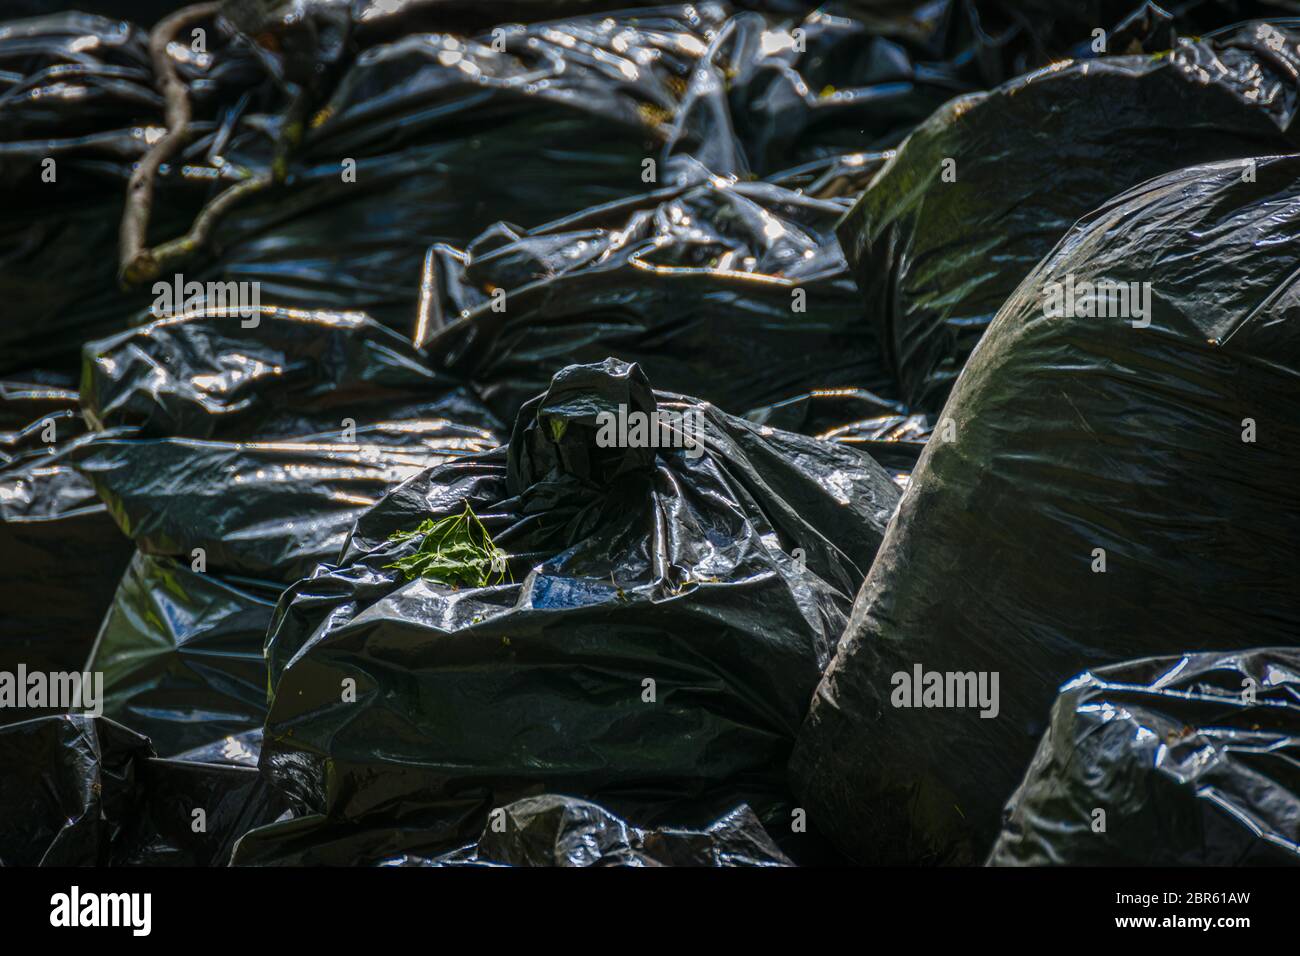 https://c8.alamy.com/comp/2BR61AW/a-large-pile-of-black-trash-bags-filled-with-household-waste-in-a-city-street-close-up-bags-with-garbage-2BR61AW.jpg